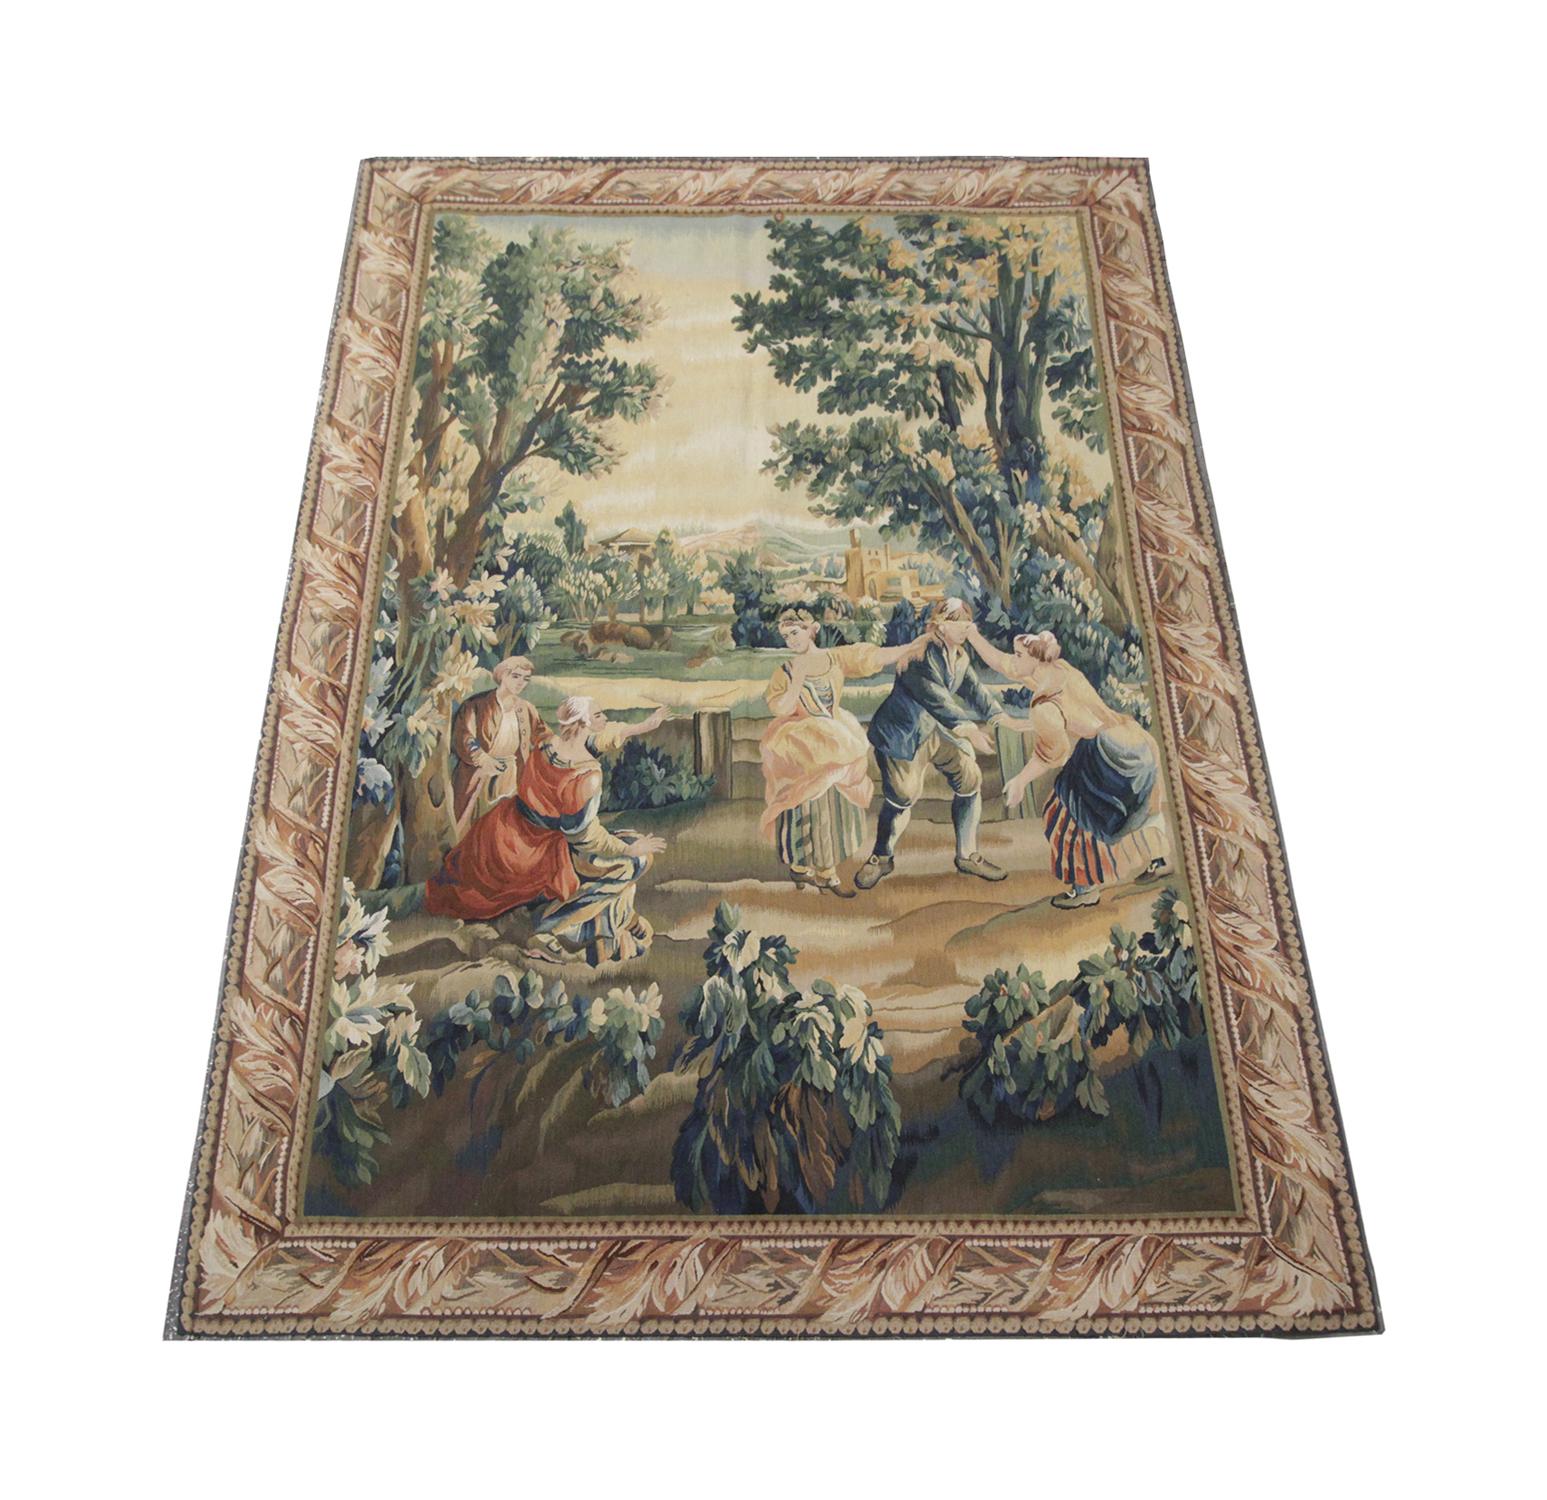 Beautiful dancing scene French-style tapestry was handmade in China and features five figures dancing in what looks like the forest of a castle. Muted greens, browns and yellows have been used to weave this realistic Tapestry. 
This high-quality